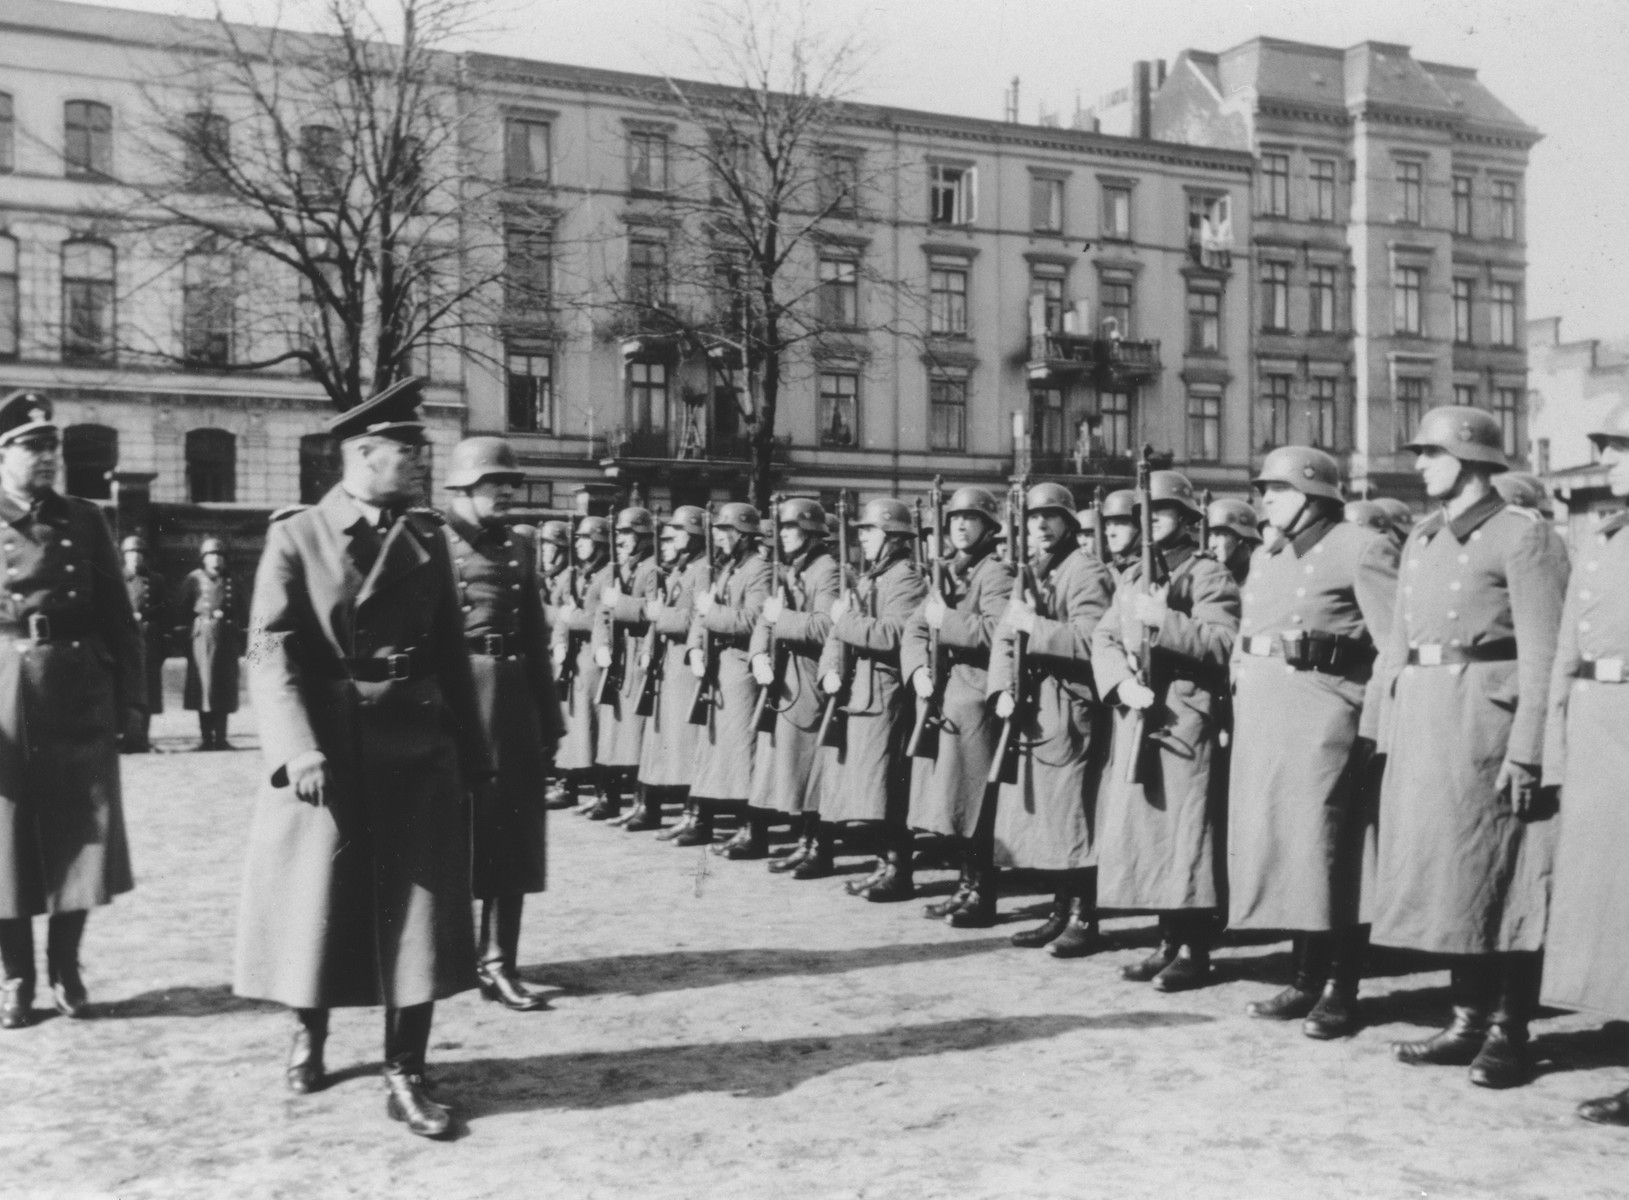 Inspection of members of Police Battalion 101 by their order police officers in a public square in Lodz. 

One image from a photograph album belonging to a member of Police Battalion 101.